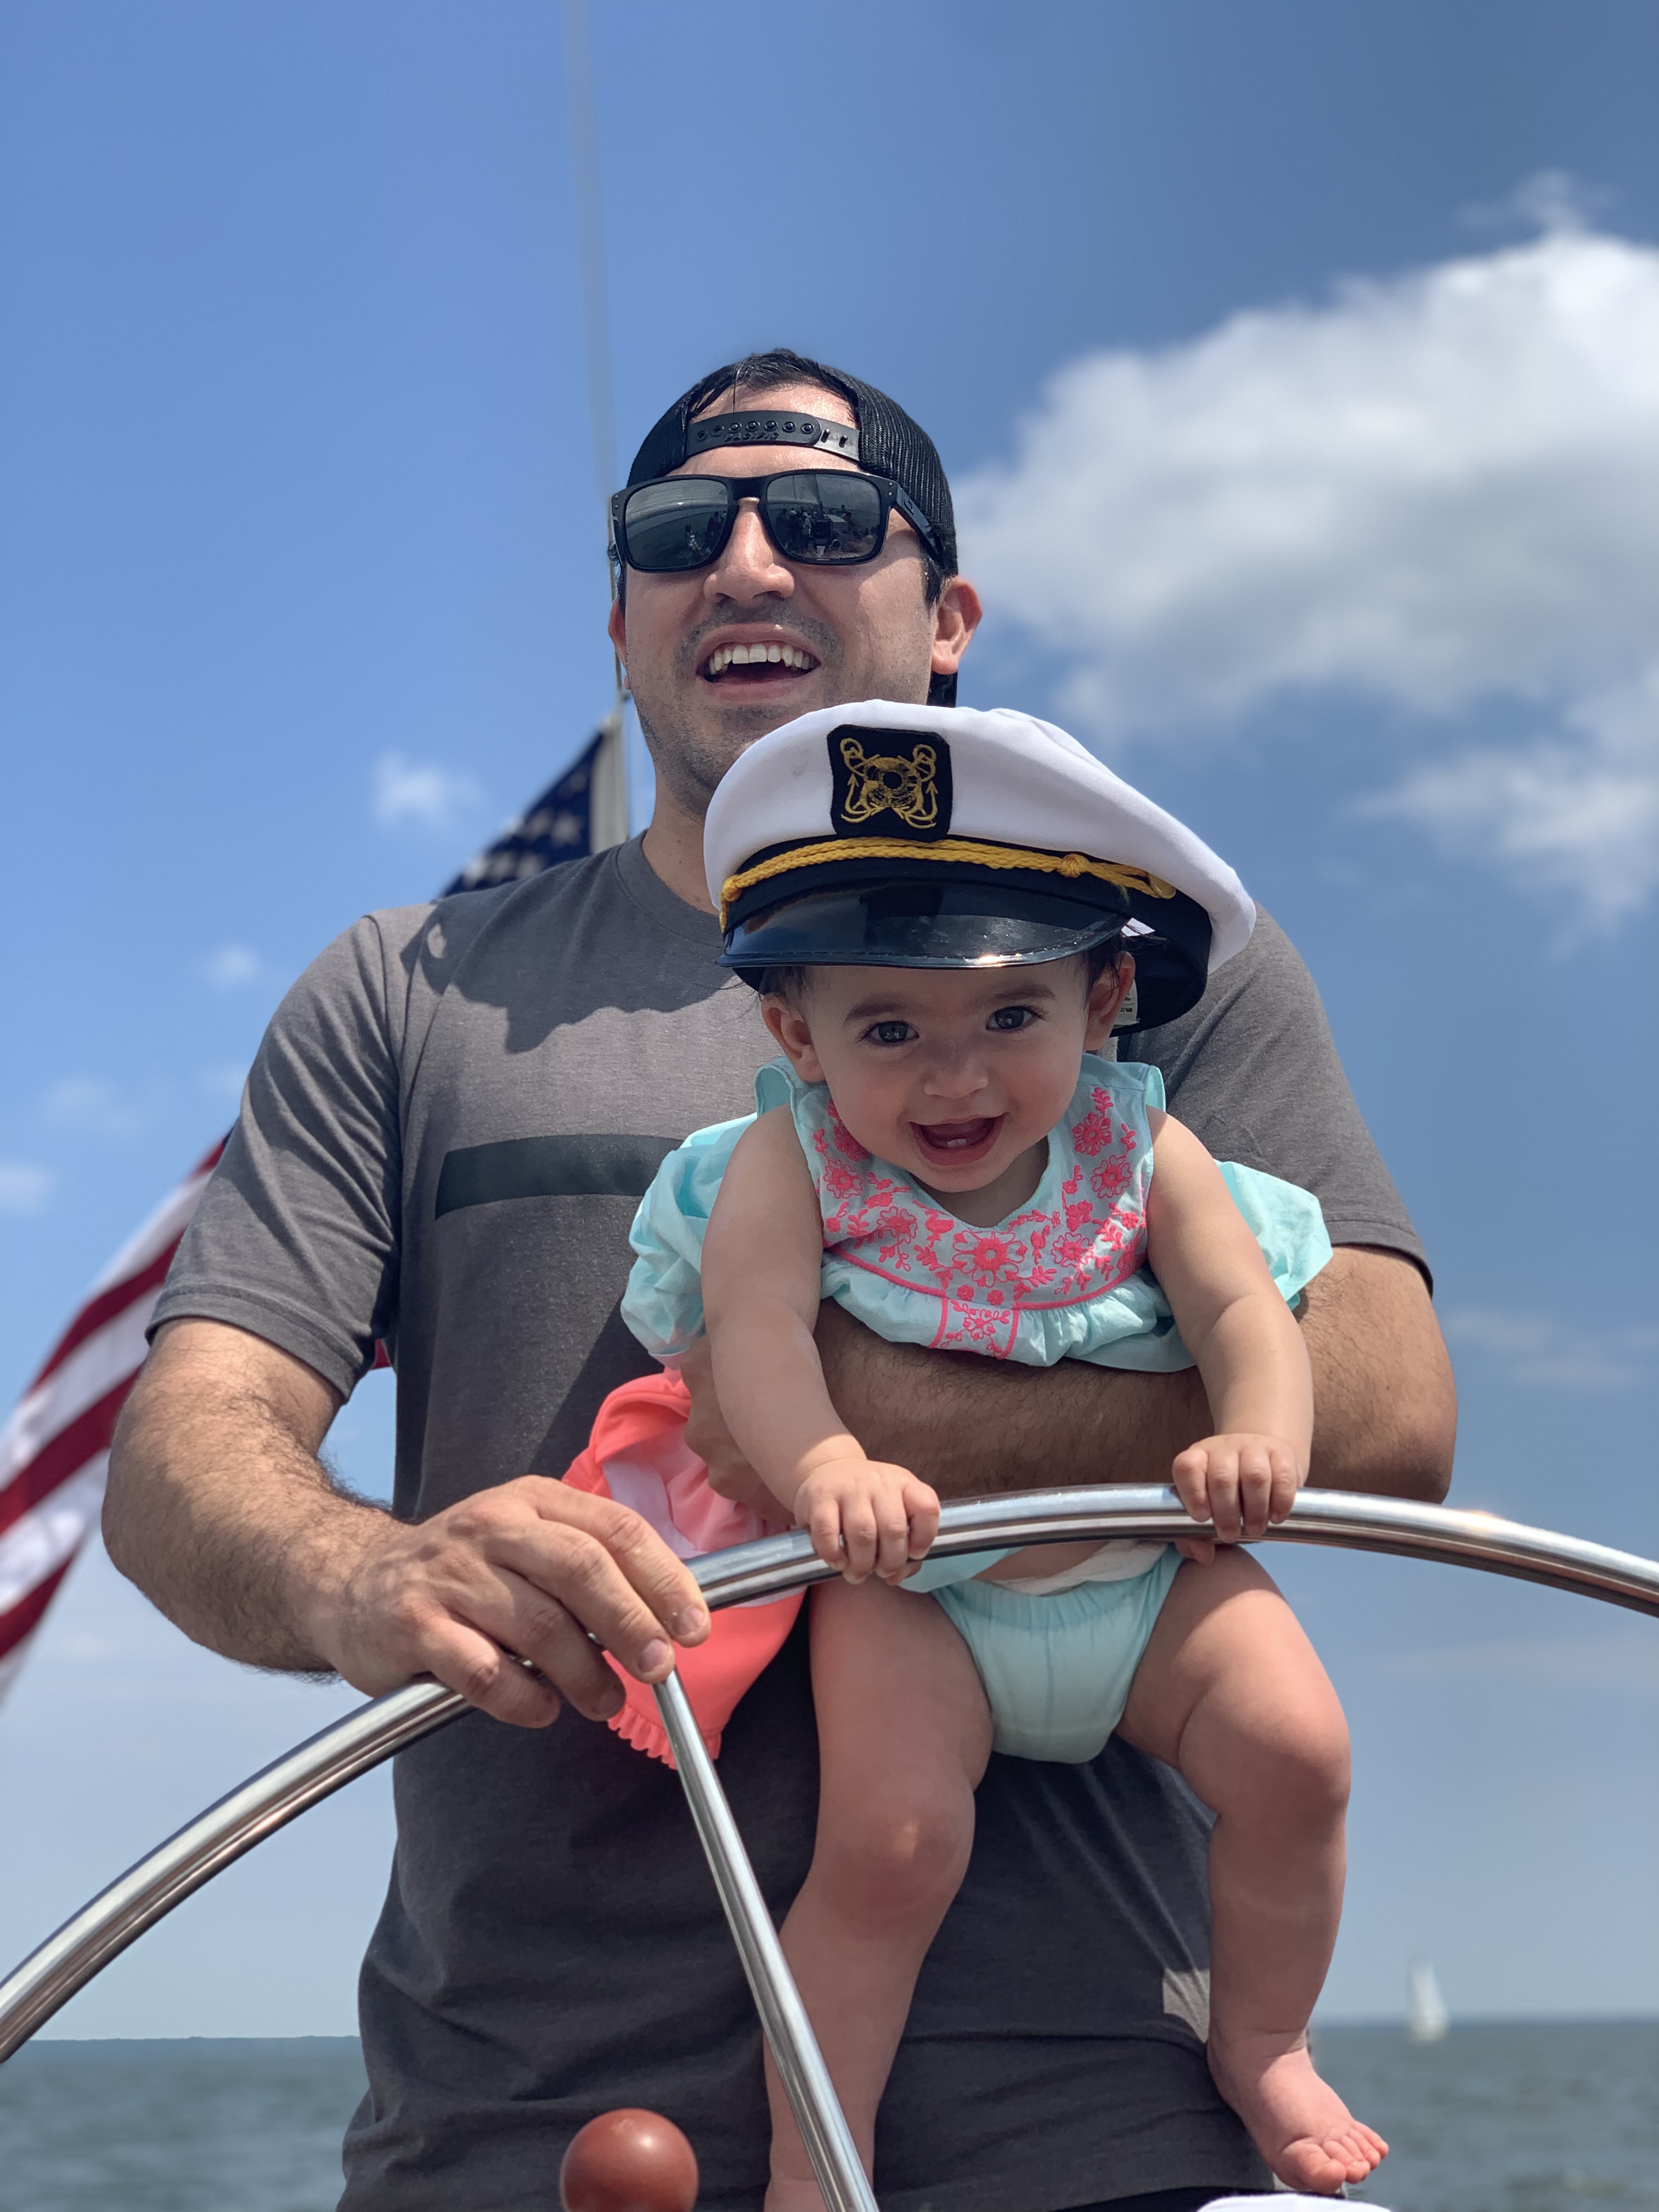 Man holding smiling baby in captain's hat who is helping him steer